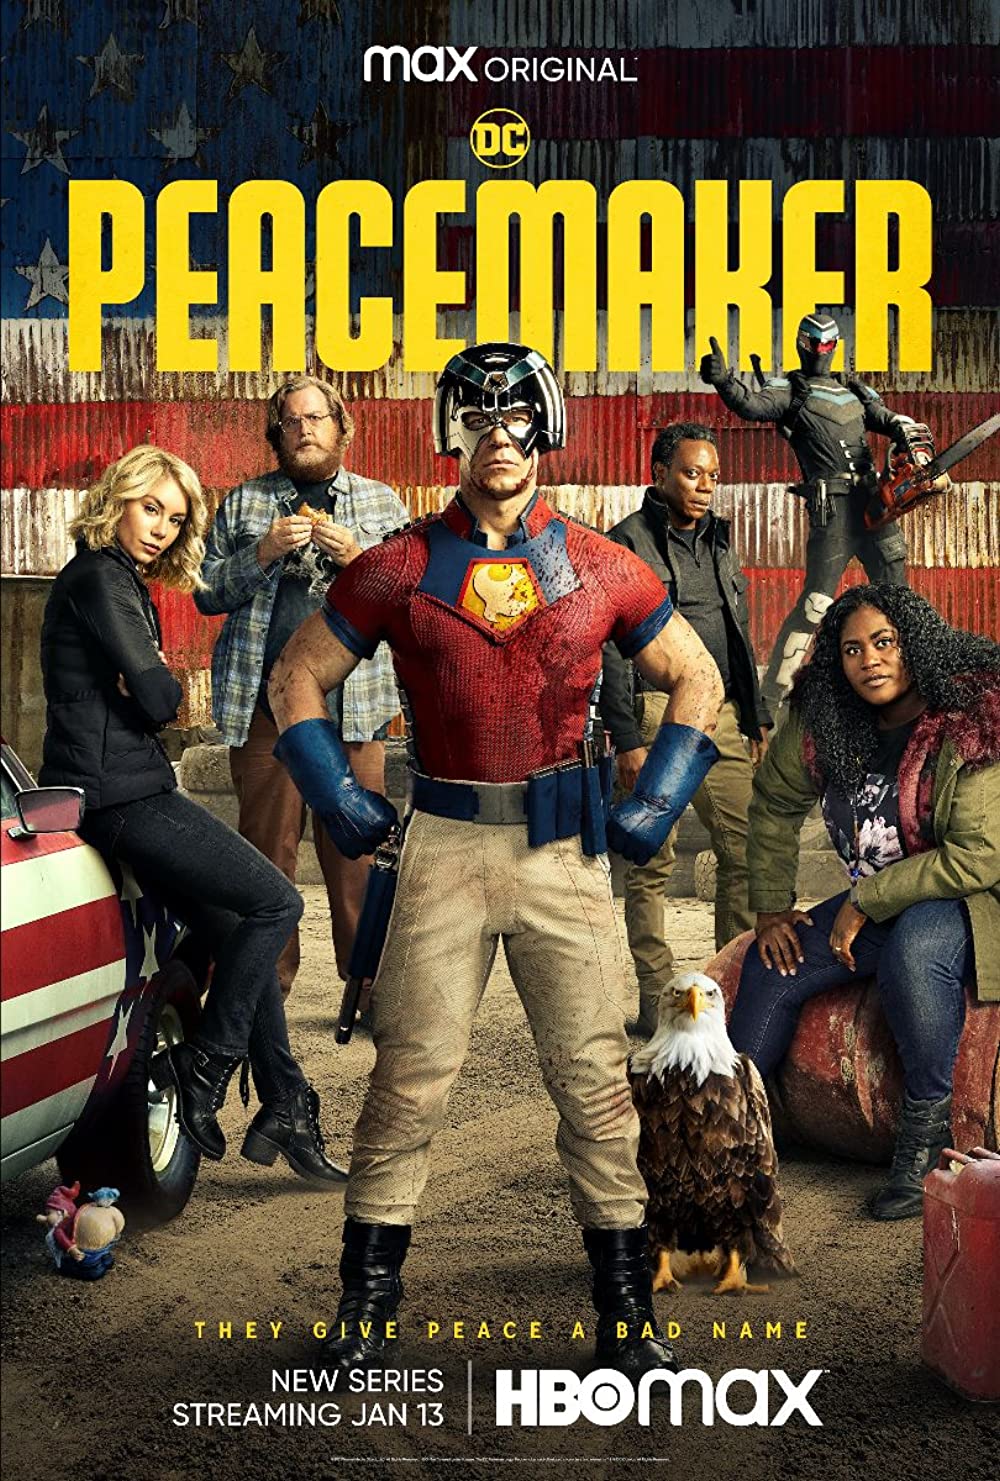 HBO Max The Peacemaker poster, John Cena as The Peacemaker is in the middle and surrounded by the rest of the cast